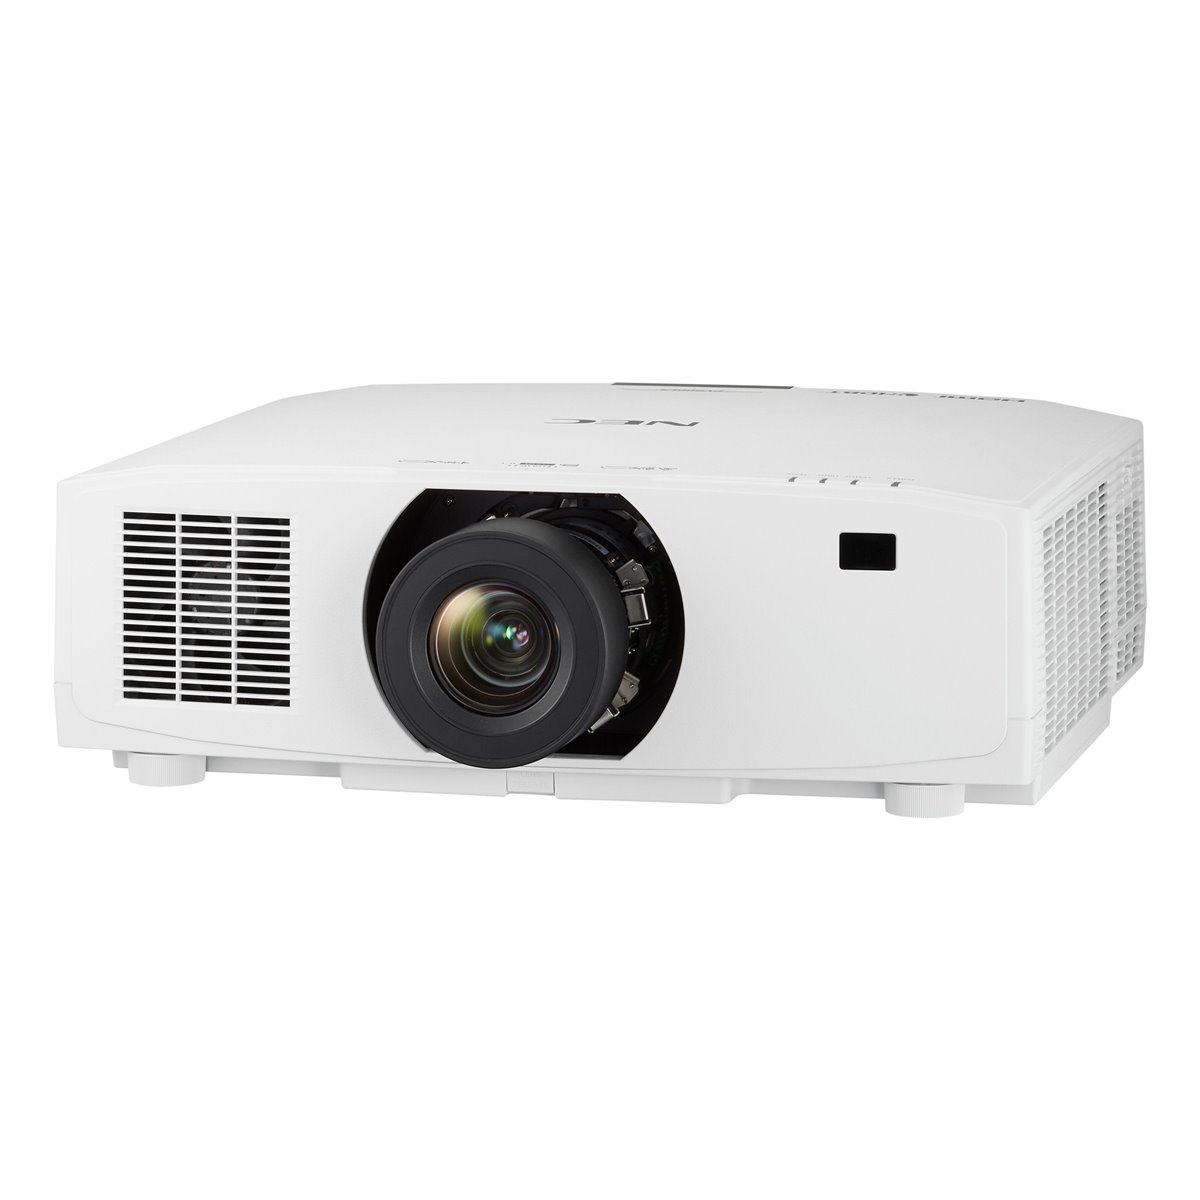 PV710UL-W - Installation Projector, WUXGA , 7100Lm, LCD, Laser Light Source, white cabinet